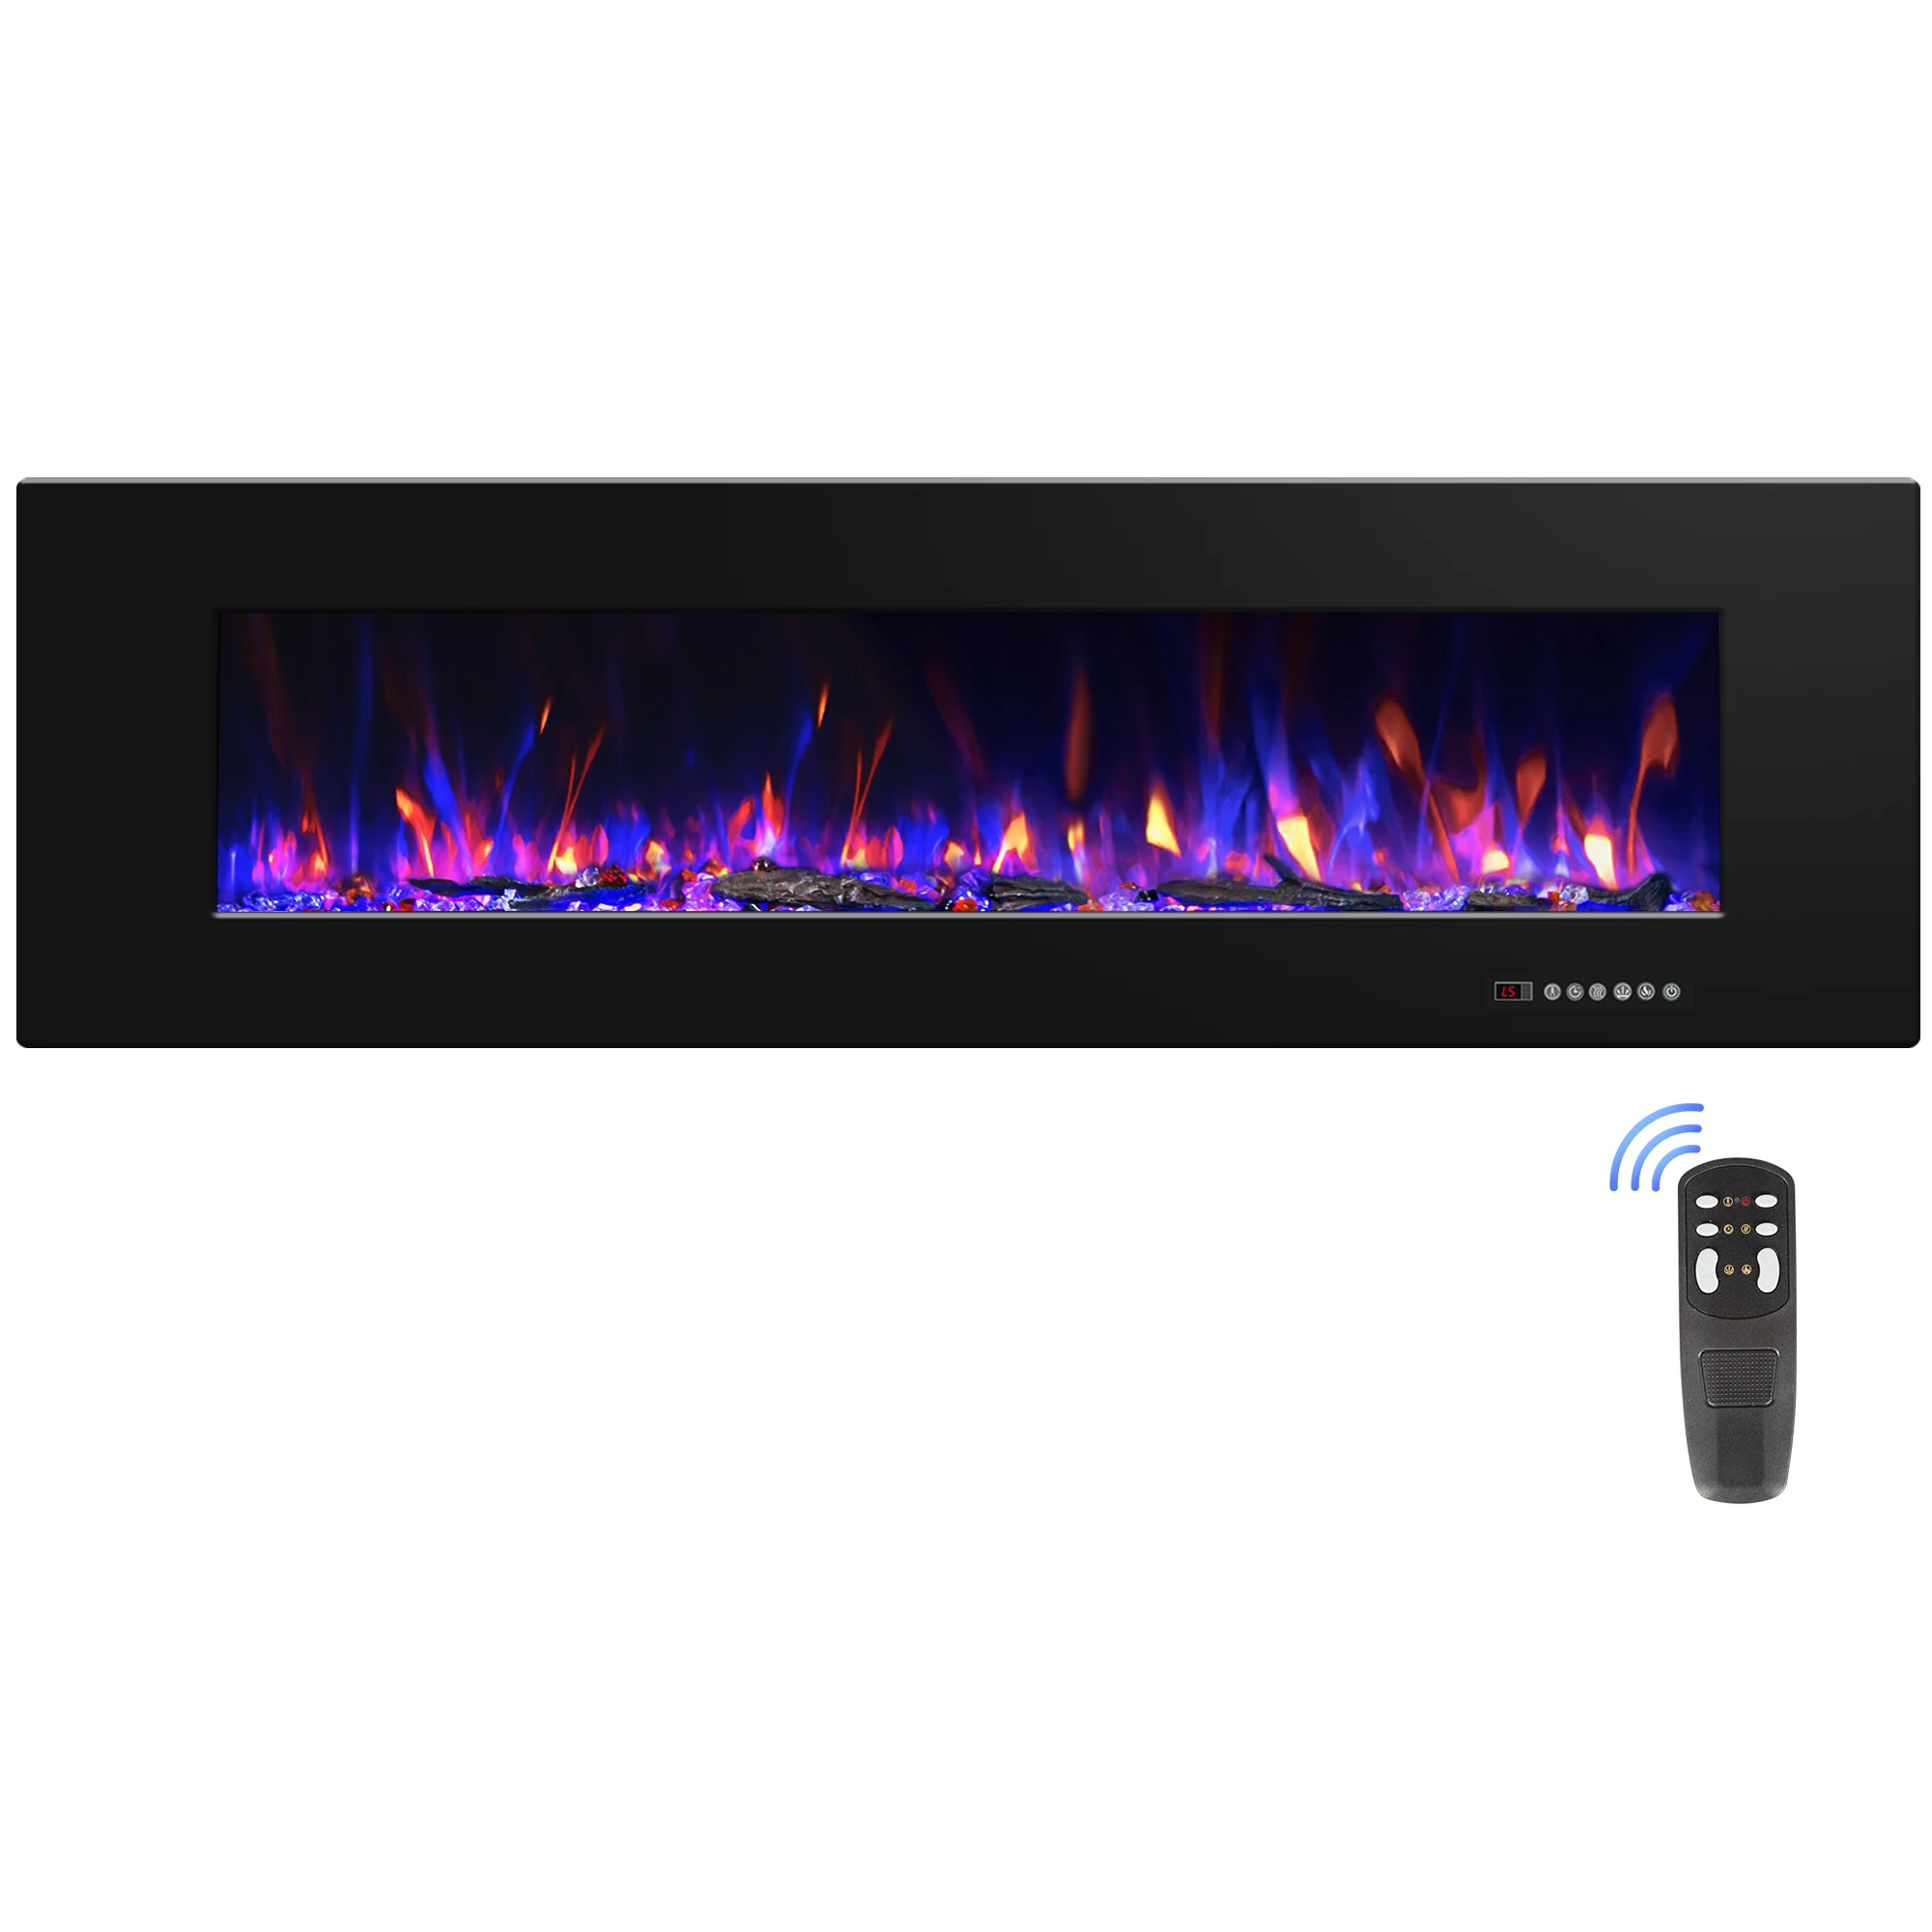 Luxstar 50 Inch High Quality Electrical Fireplace Heating Wall Mounted Heaters Not for Recessed Log Crystal Decorative Fireplace